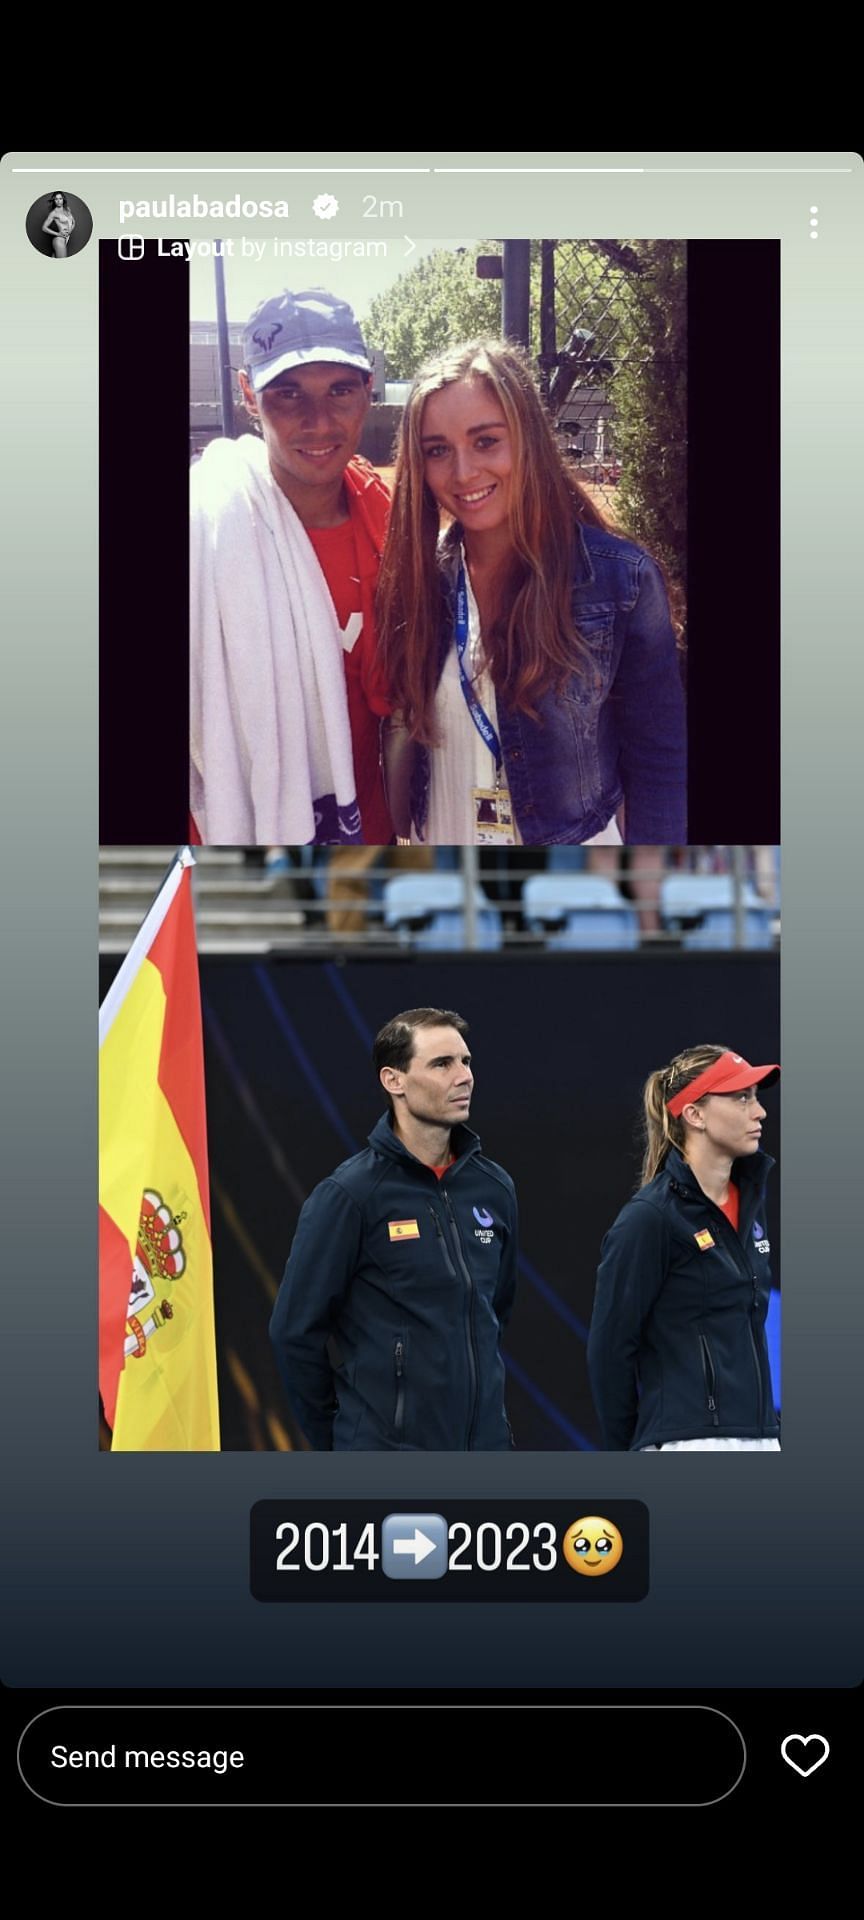 Paula Badosa shares a visual on her Instagram with Rafael Nadal